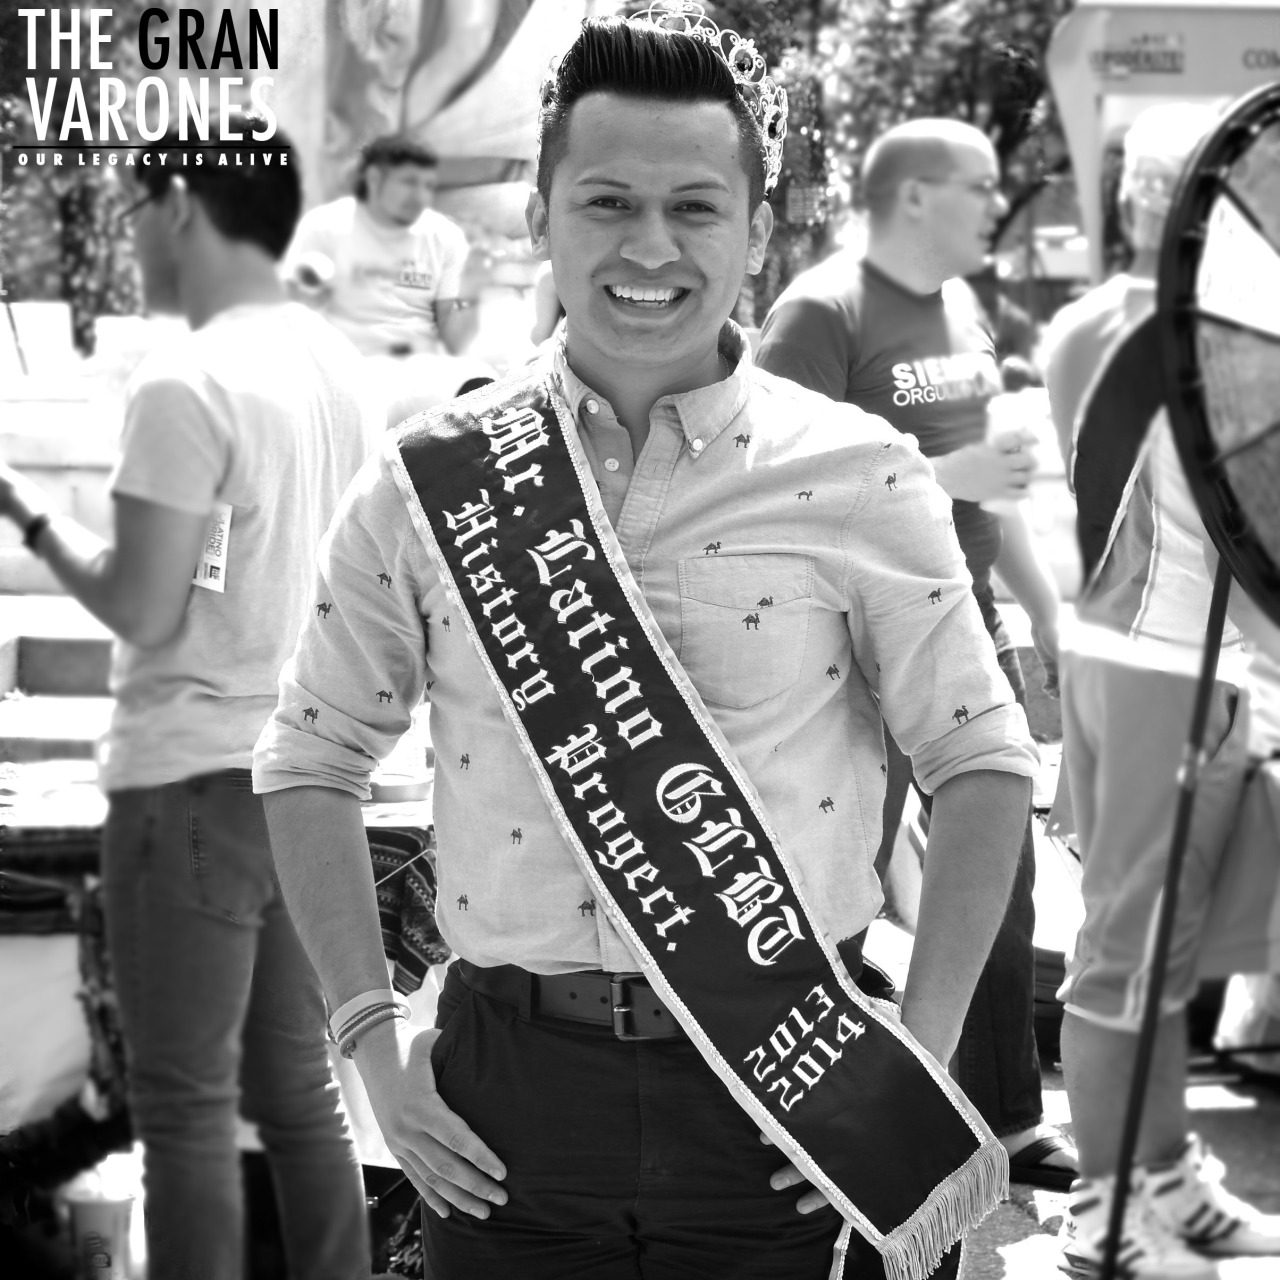 GV: So you have been crowned Mr. Latino History Project, what is the importance of that title for you?
Ivan: The importance of being part of the Latino History Project is to help my community and have a major impact on the youth I work with;...